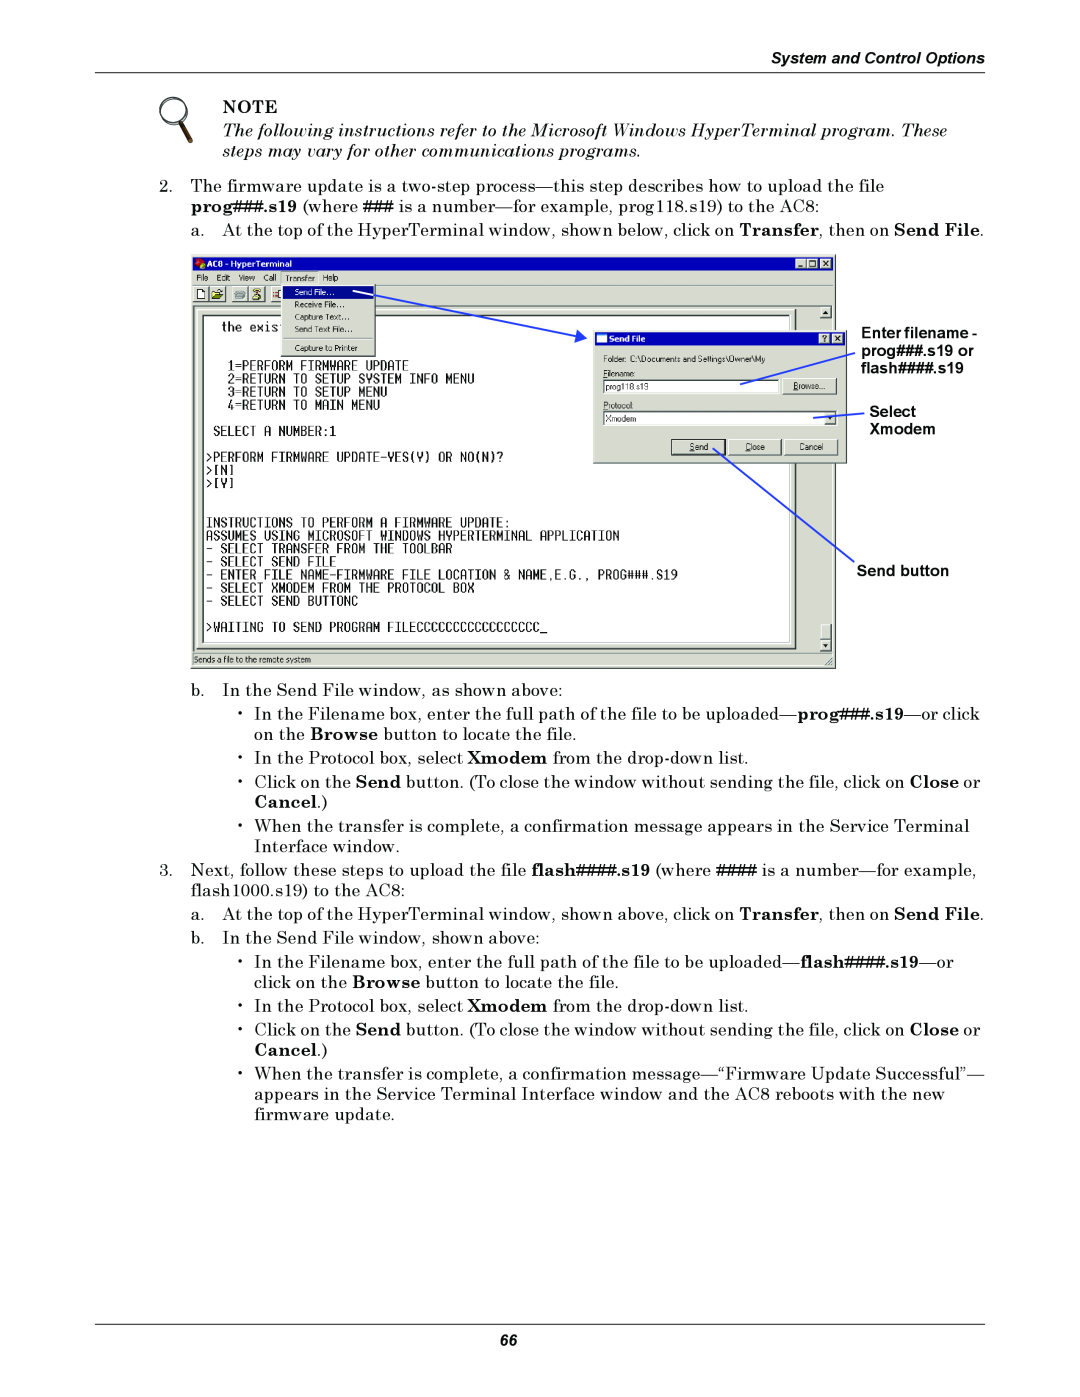 Emerson AC8 user manual b.In the Send File window, as shown above 